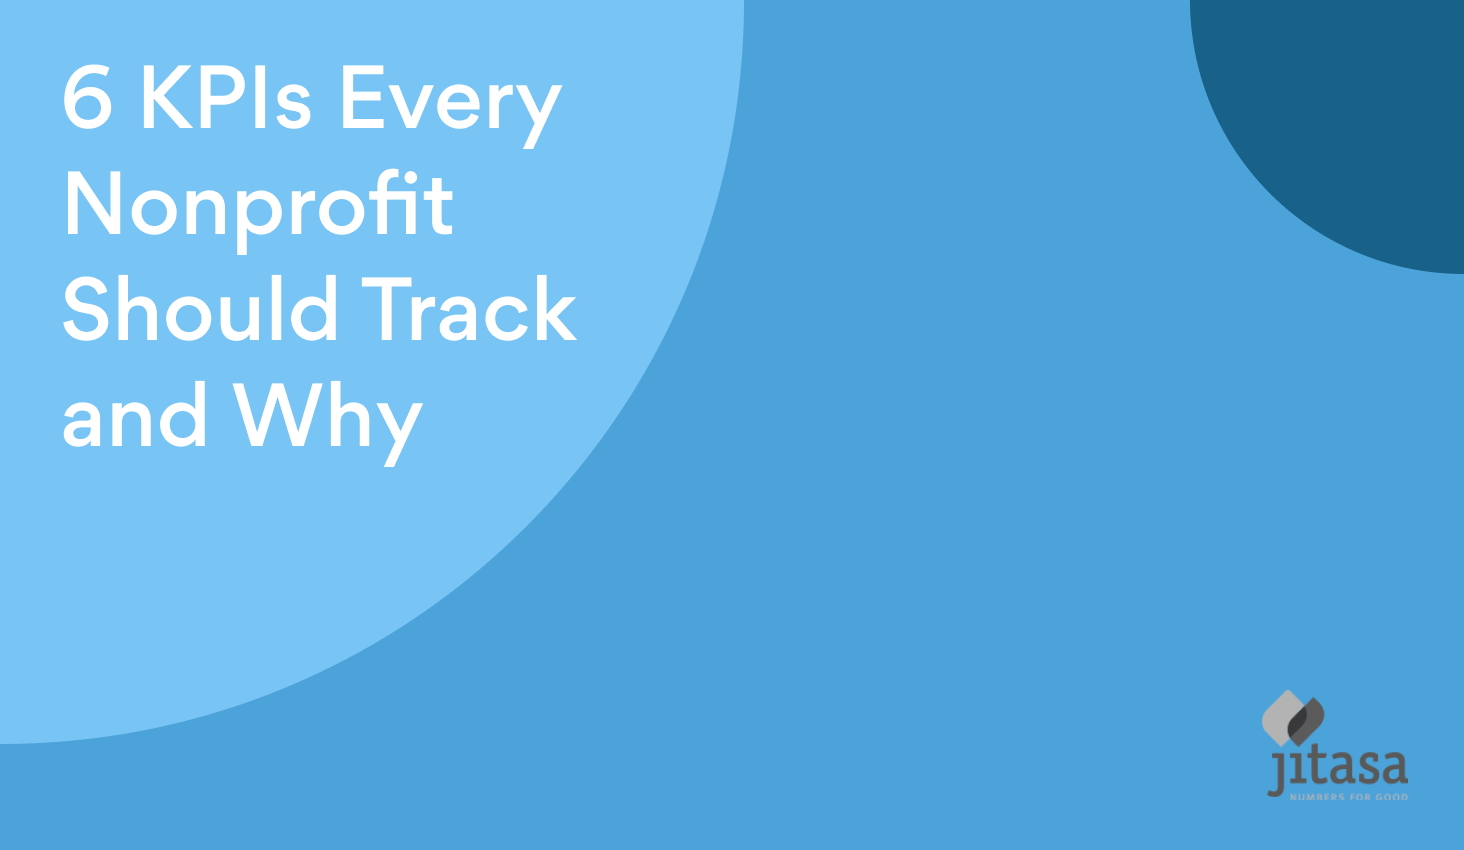 6 Kpis Every Nonprofit Organisation Should Track And Why